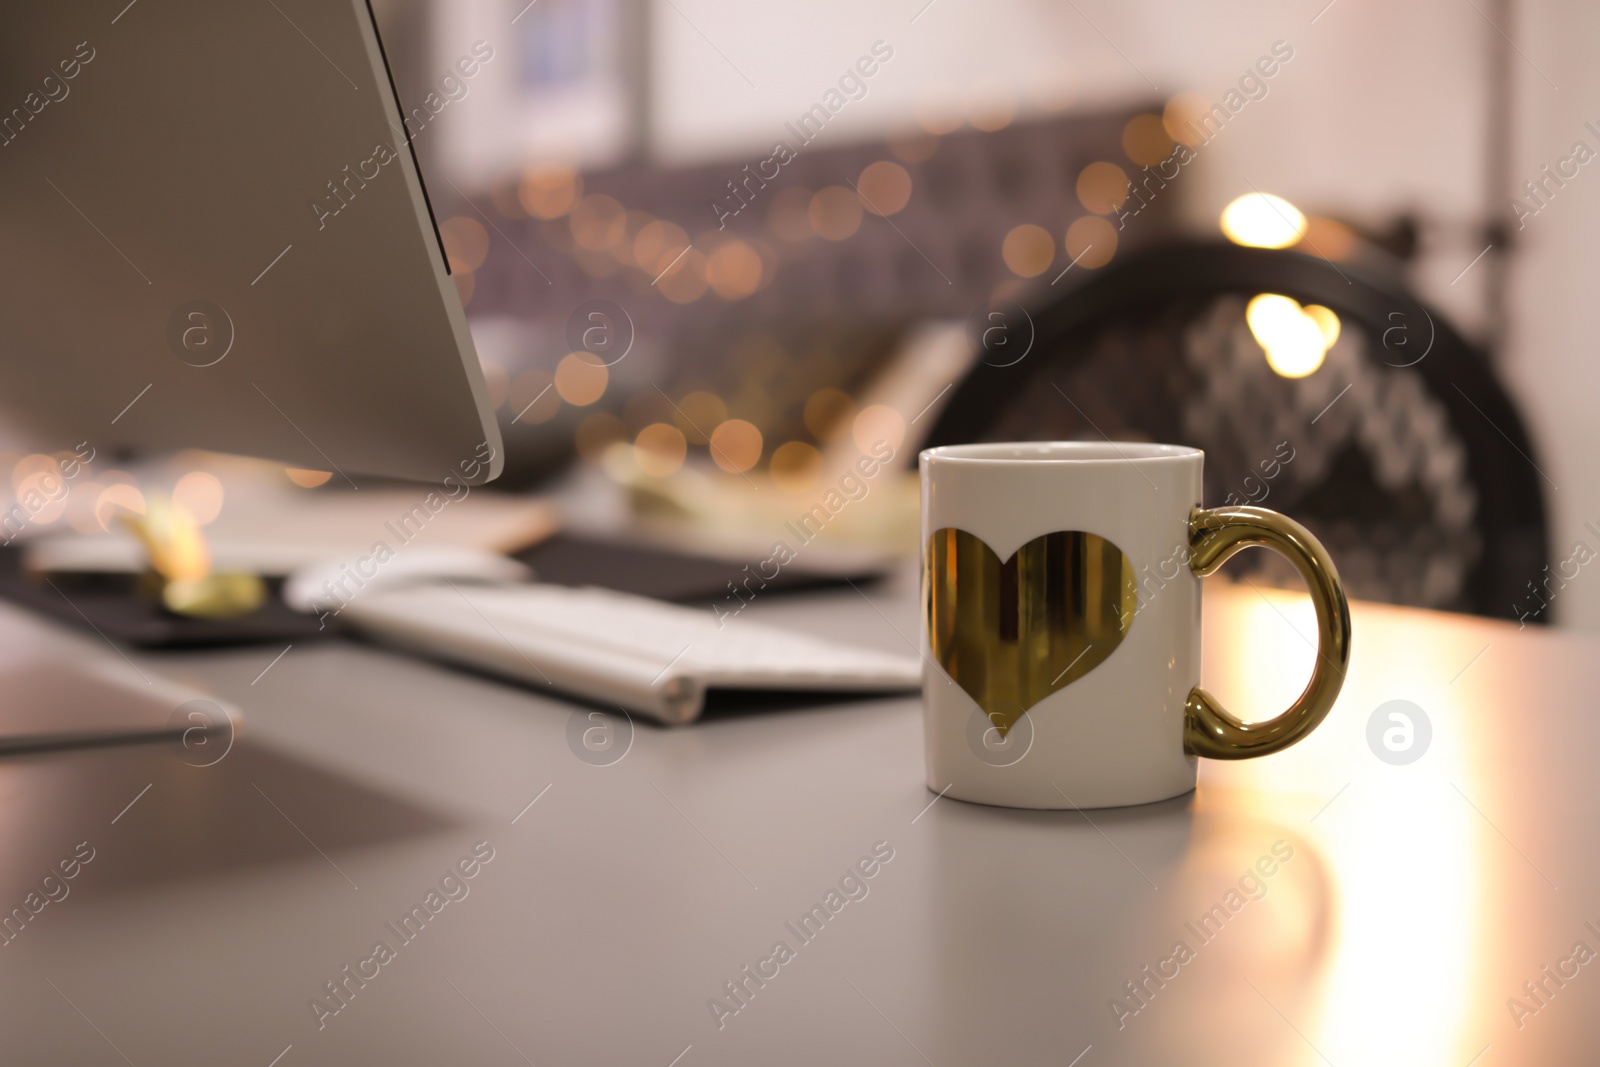 Photo of Stylish workplace with modern computer on desk. Focus on cup of drink